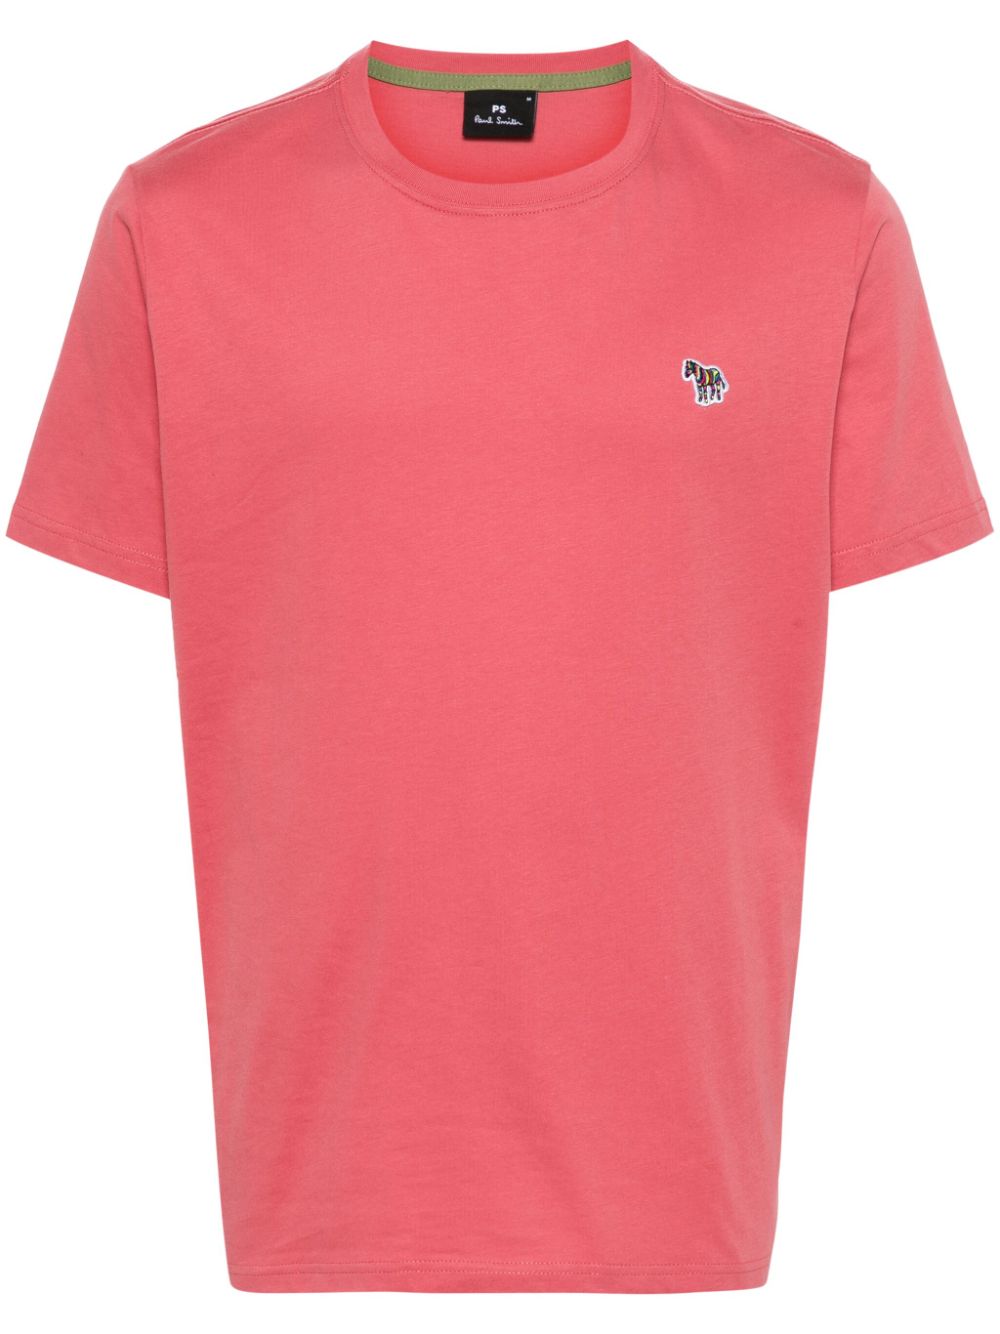 PS Paul Smith Zebra-patch short-sleeve T-shirt - Pink von PS Paul Smith